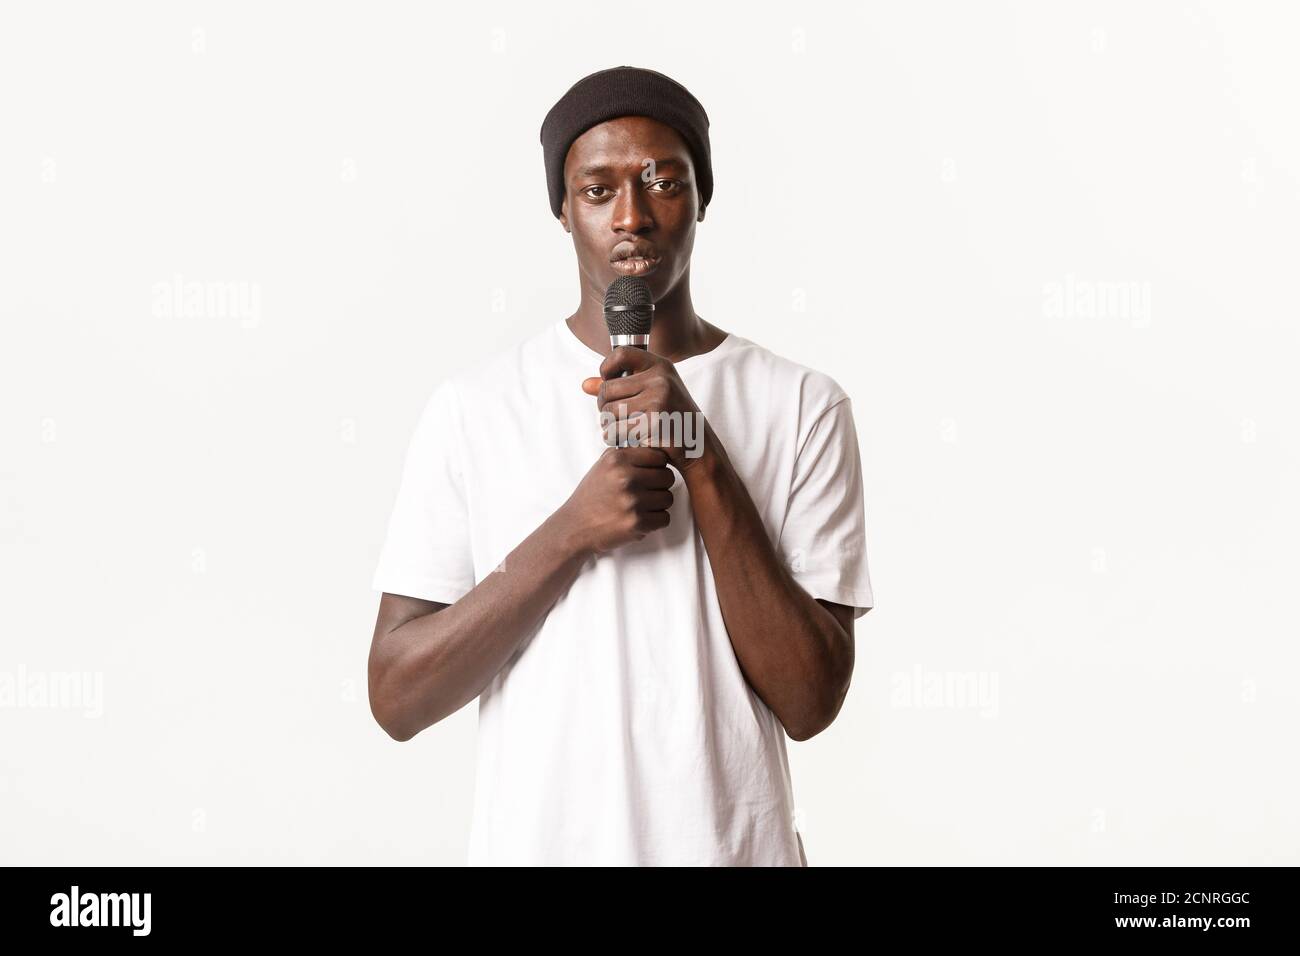 Portrait of young african-american guy performing song, holding microphone and singing karaoke, white background Stock Photo